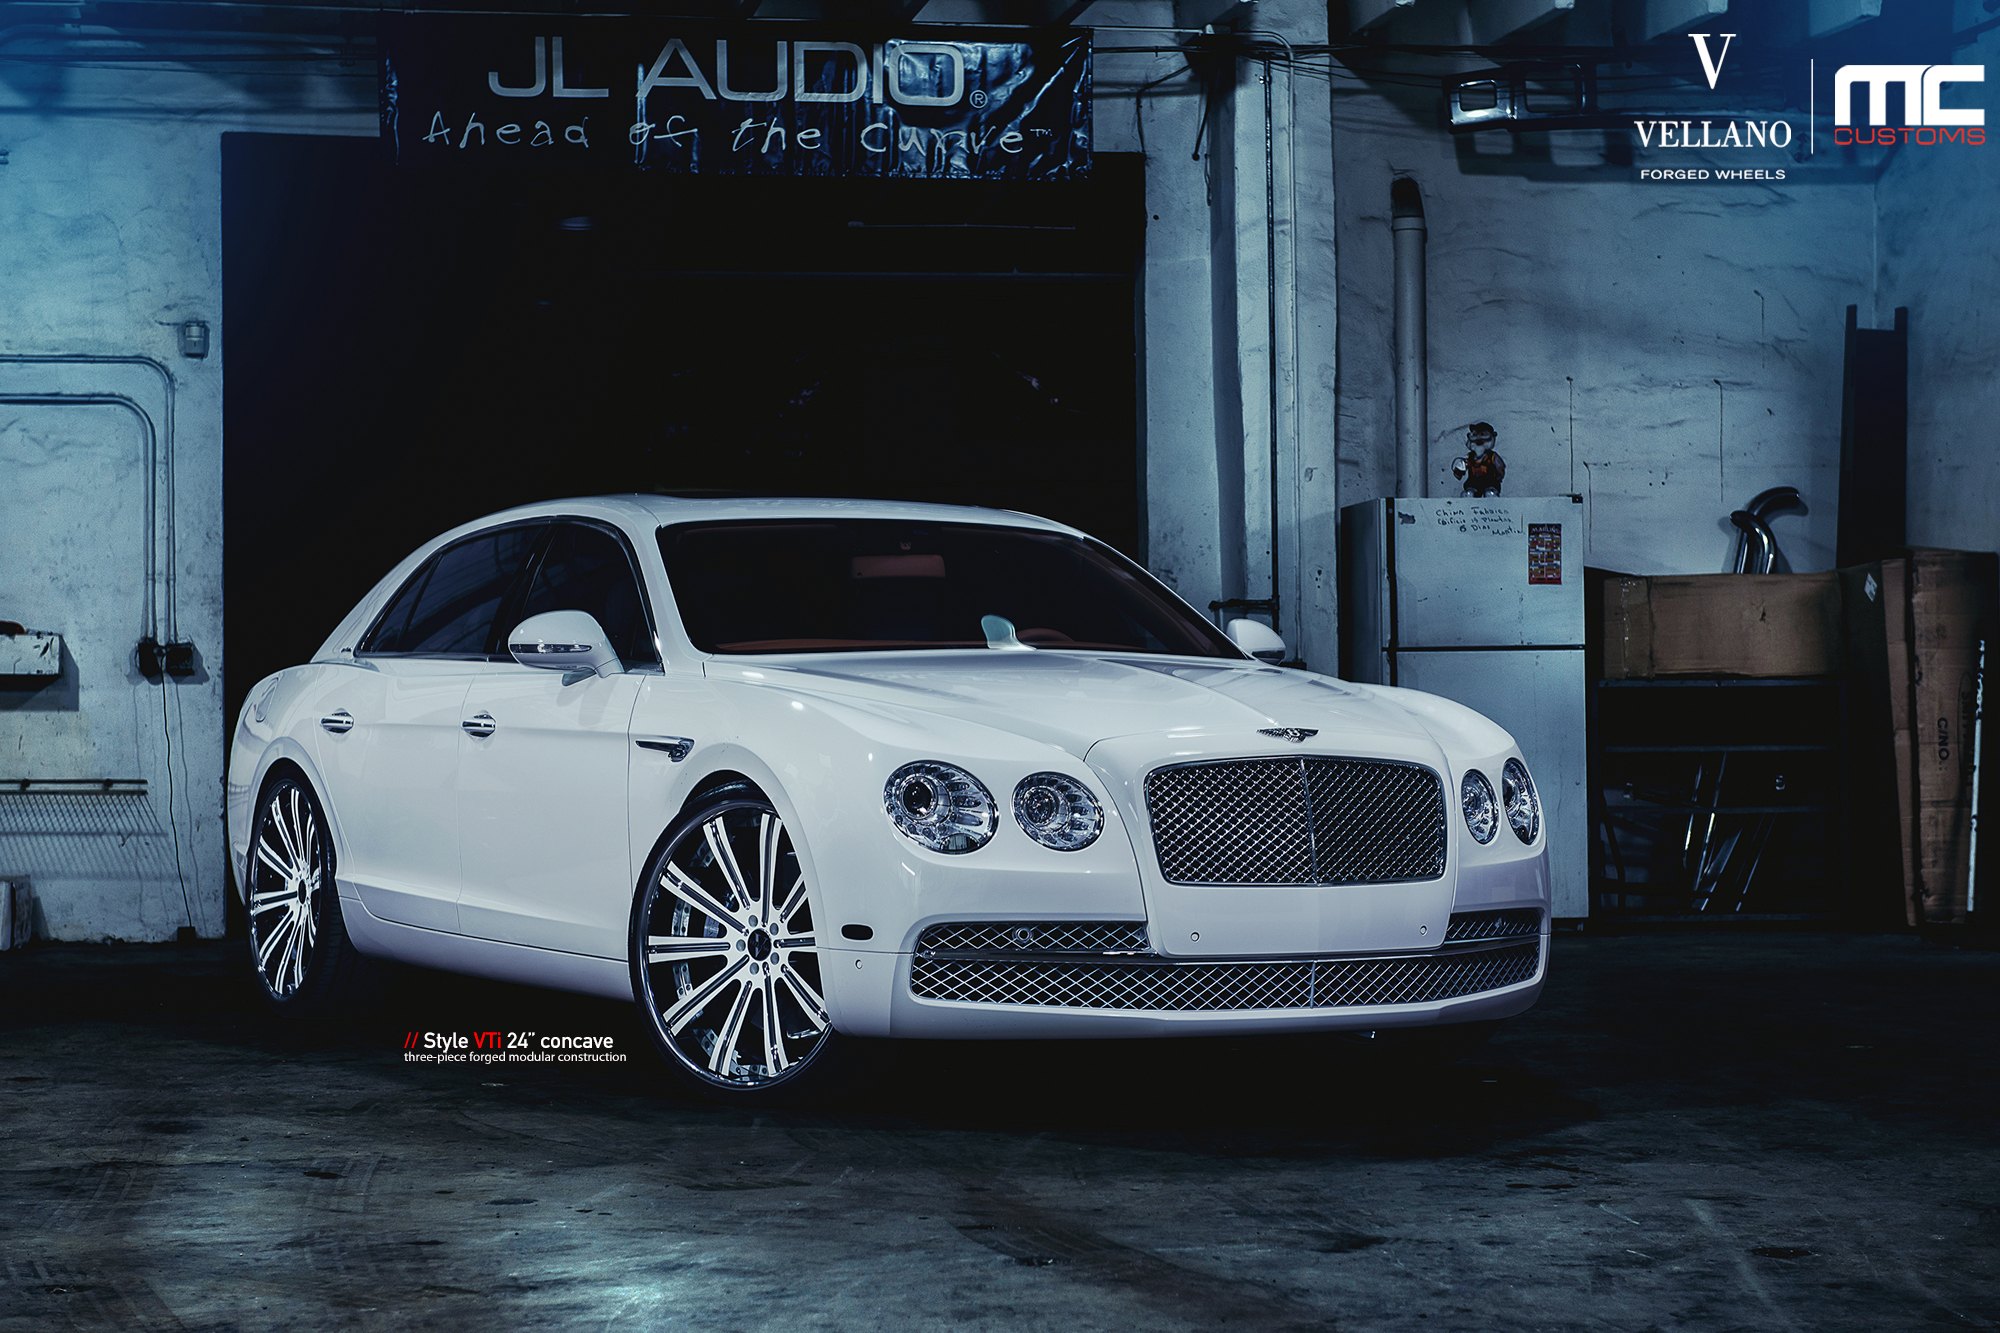 Aftermarket Front Bumper on White Bently Flying Spur - Photo by Vellano